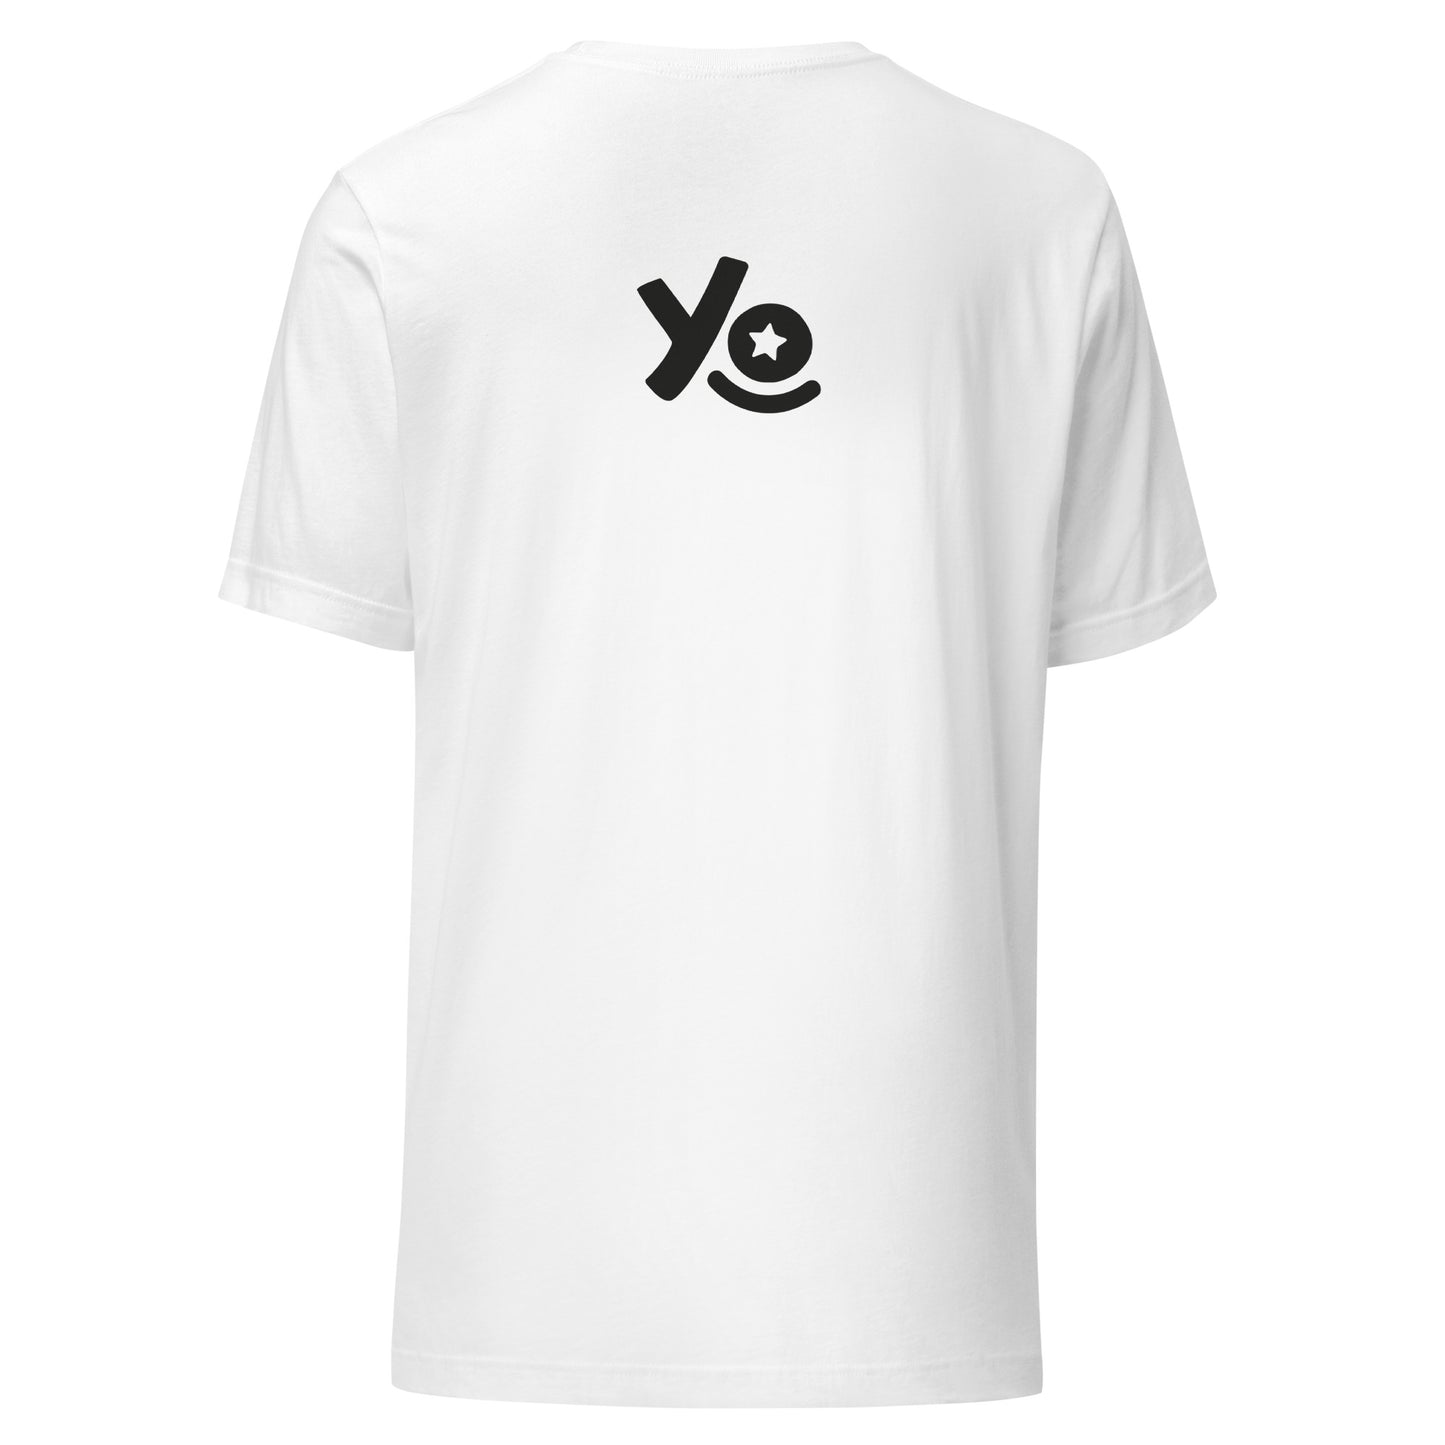 tshirt white young inventors from the back